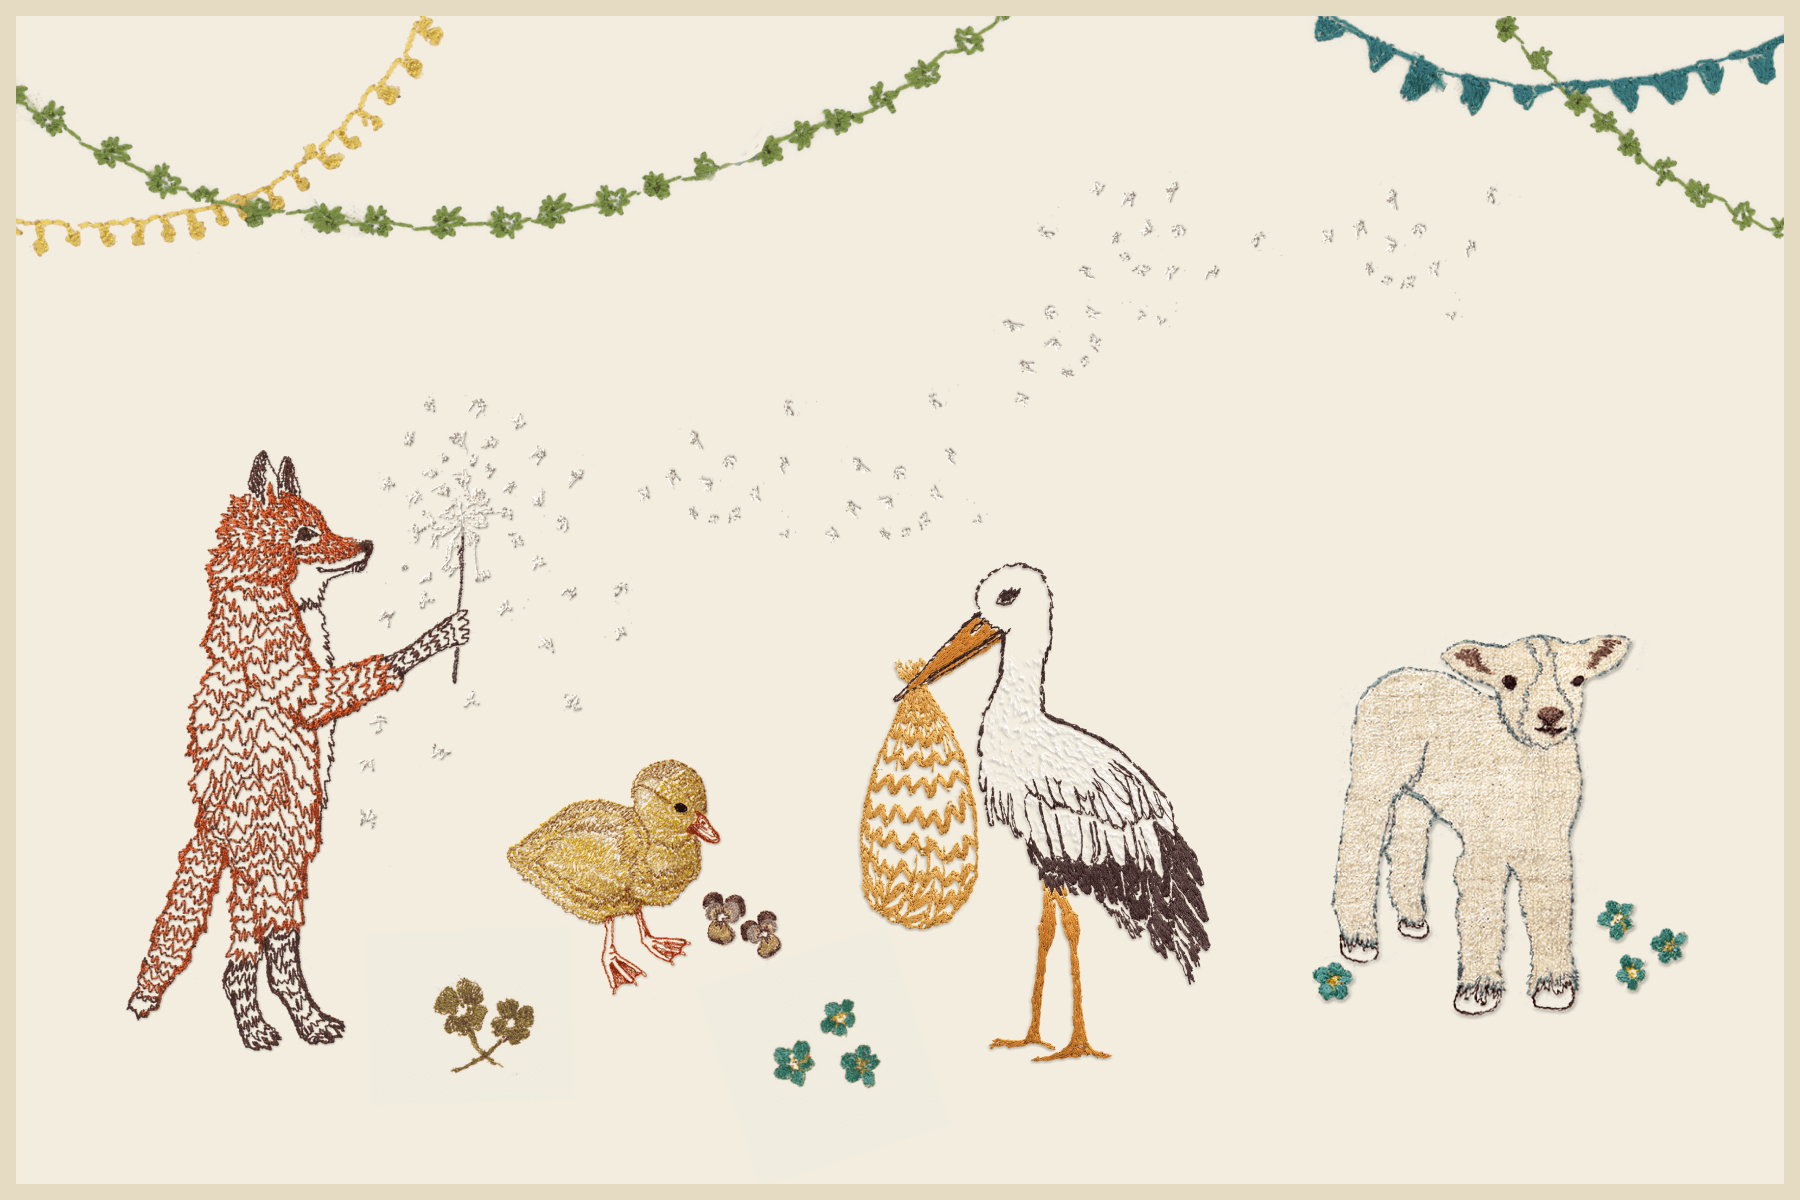 Illustrations of embroidered animals, including a fox, a duckling, a stork, and a lamb.